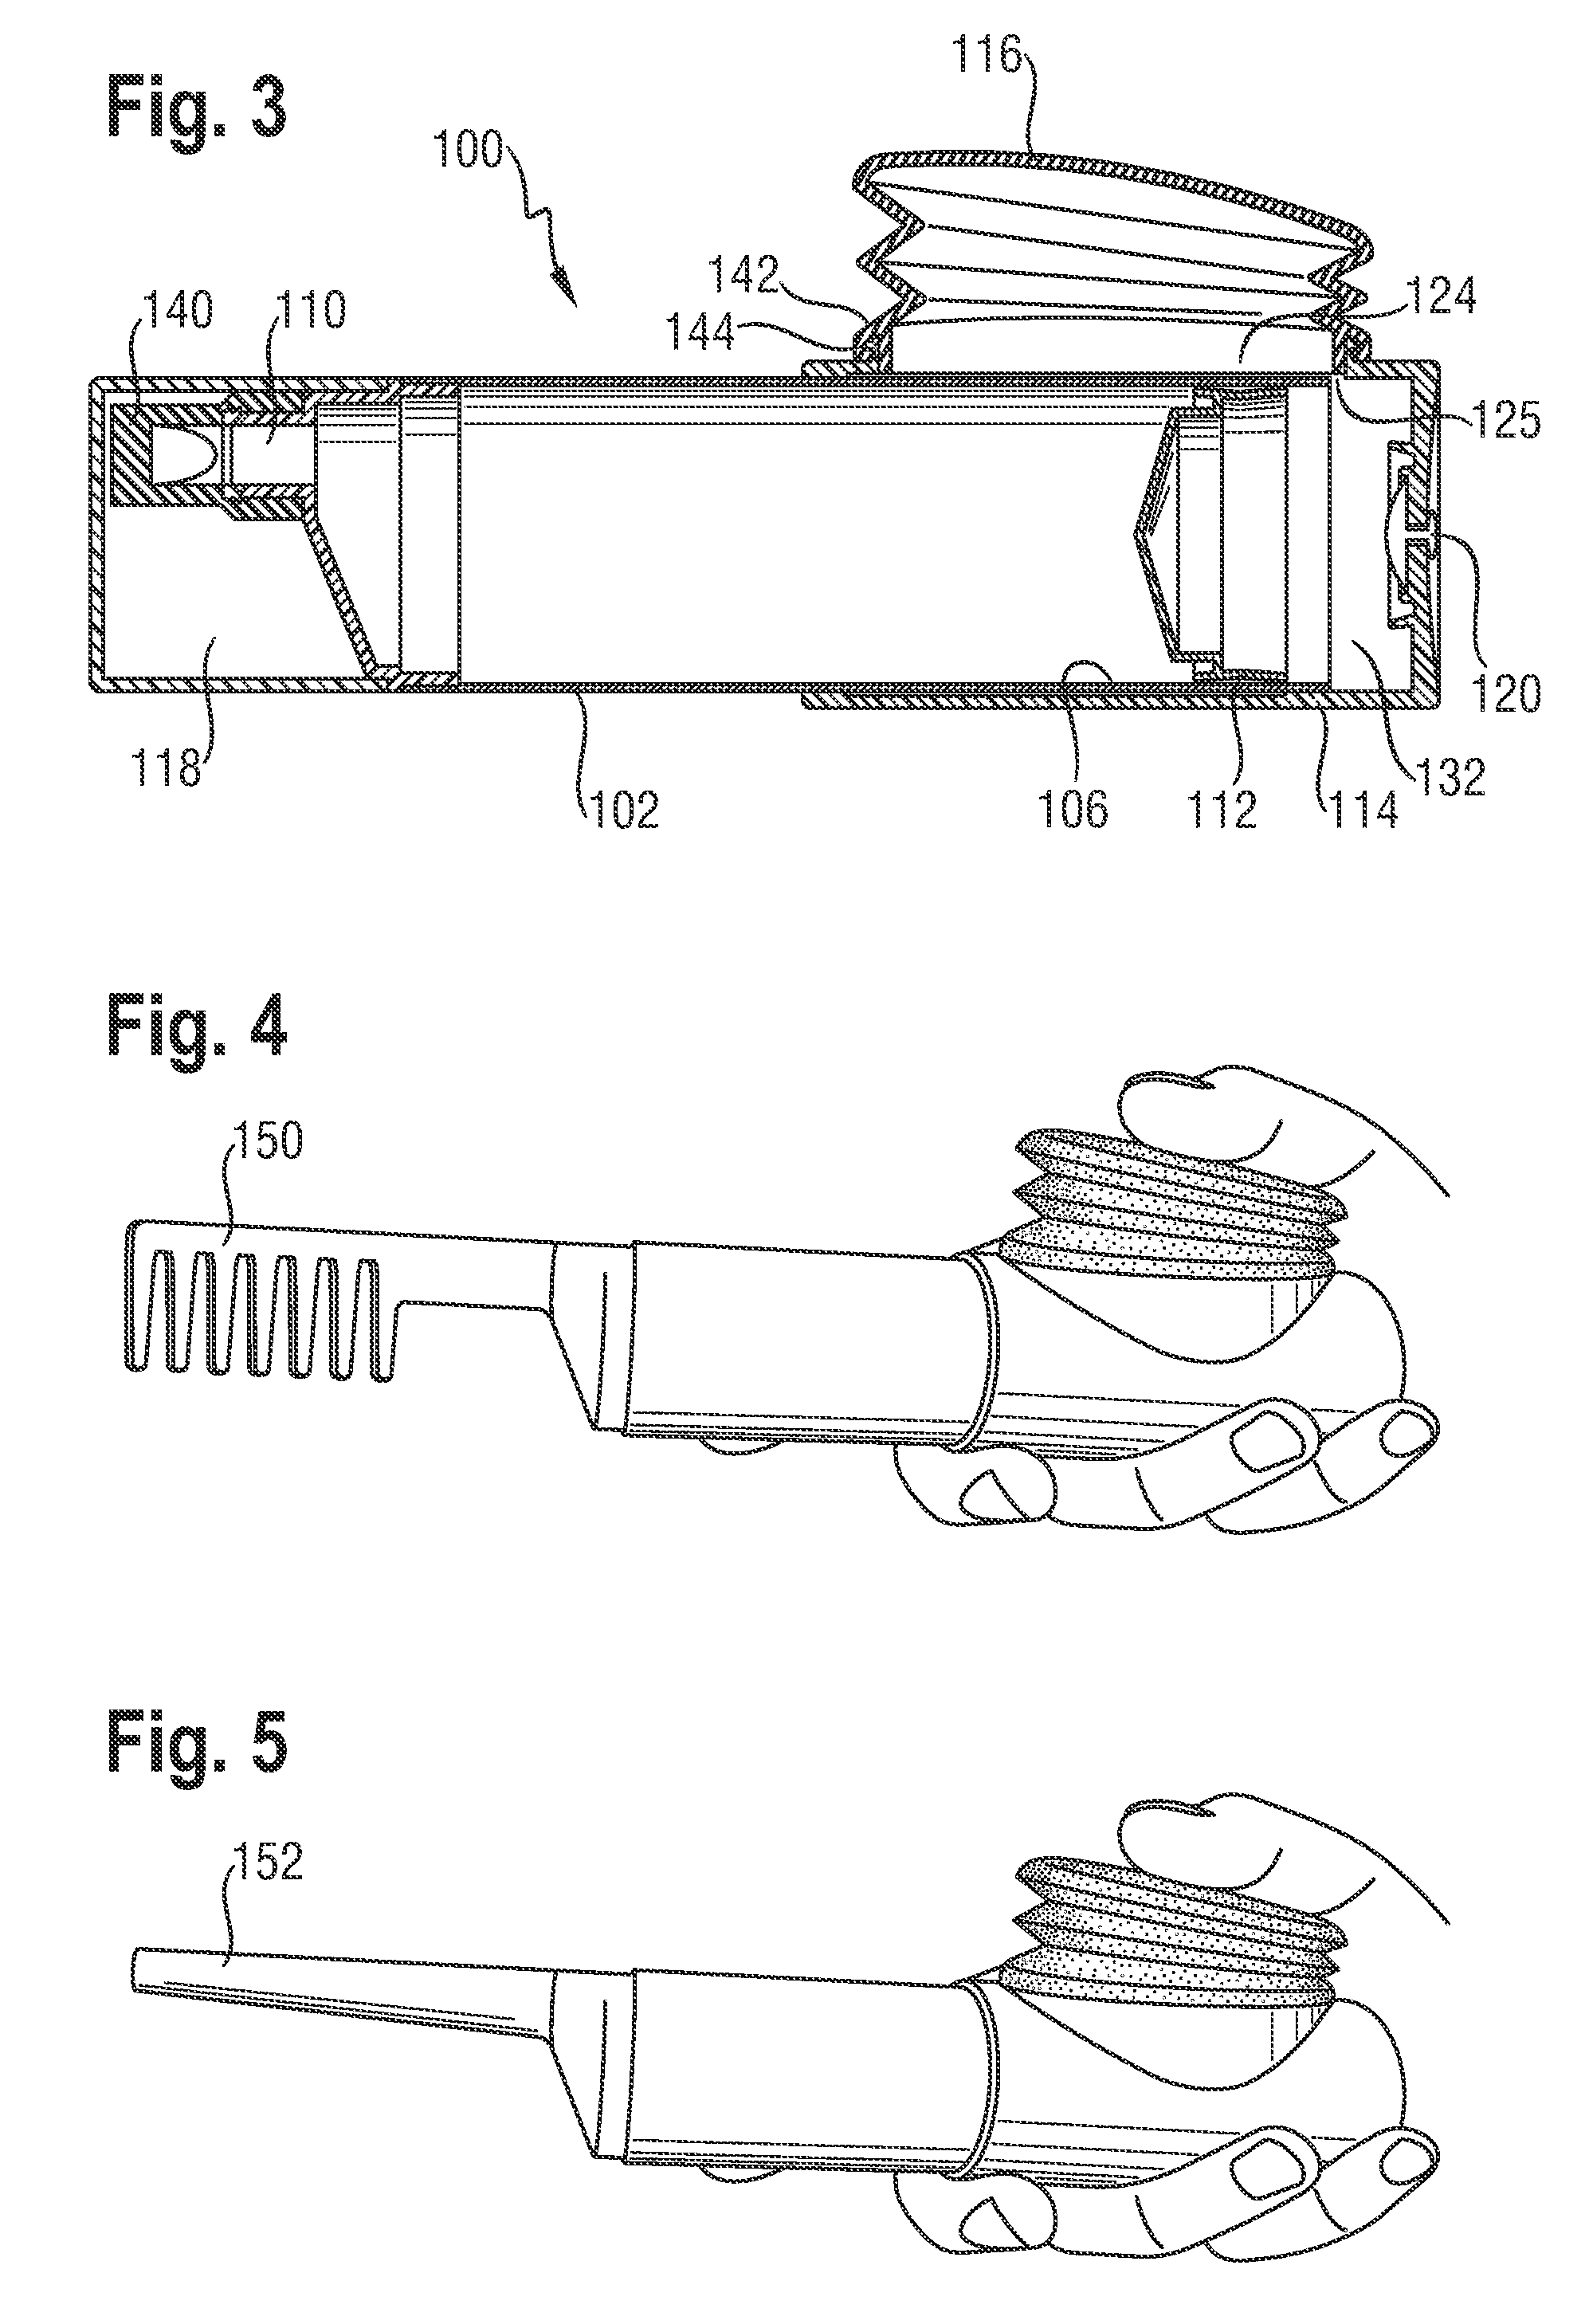 Dispensing device for viscous materials